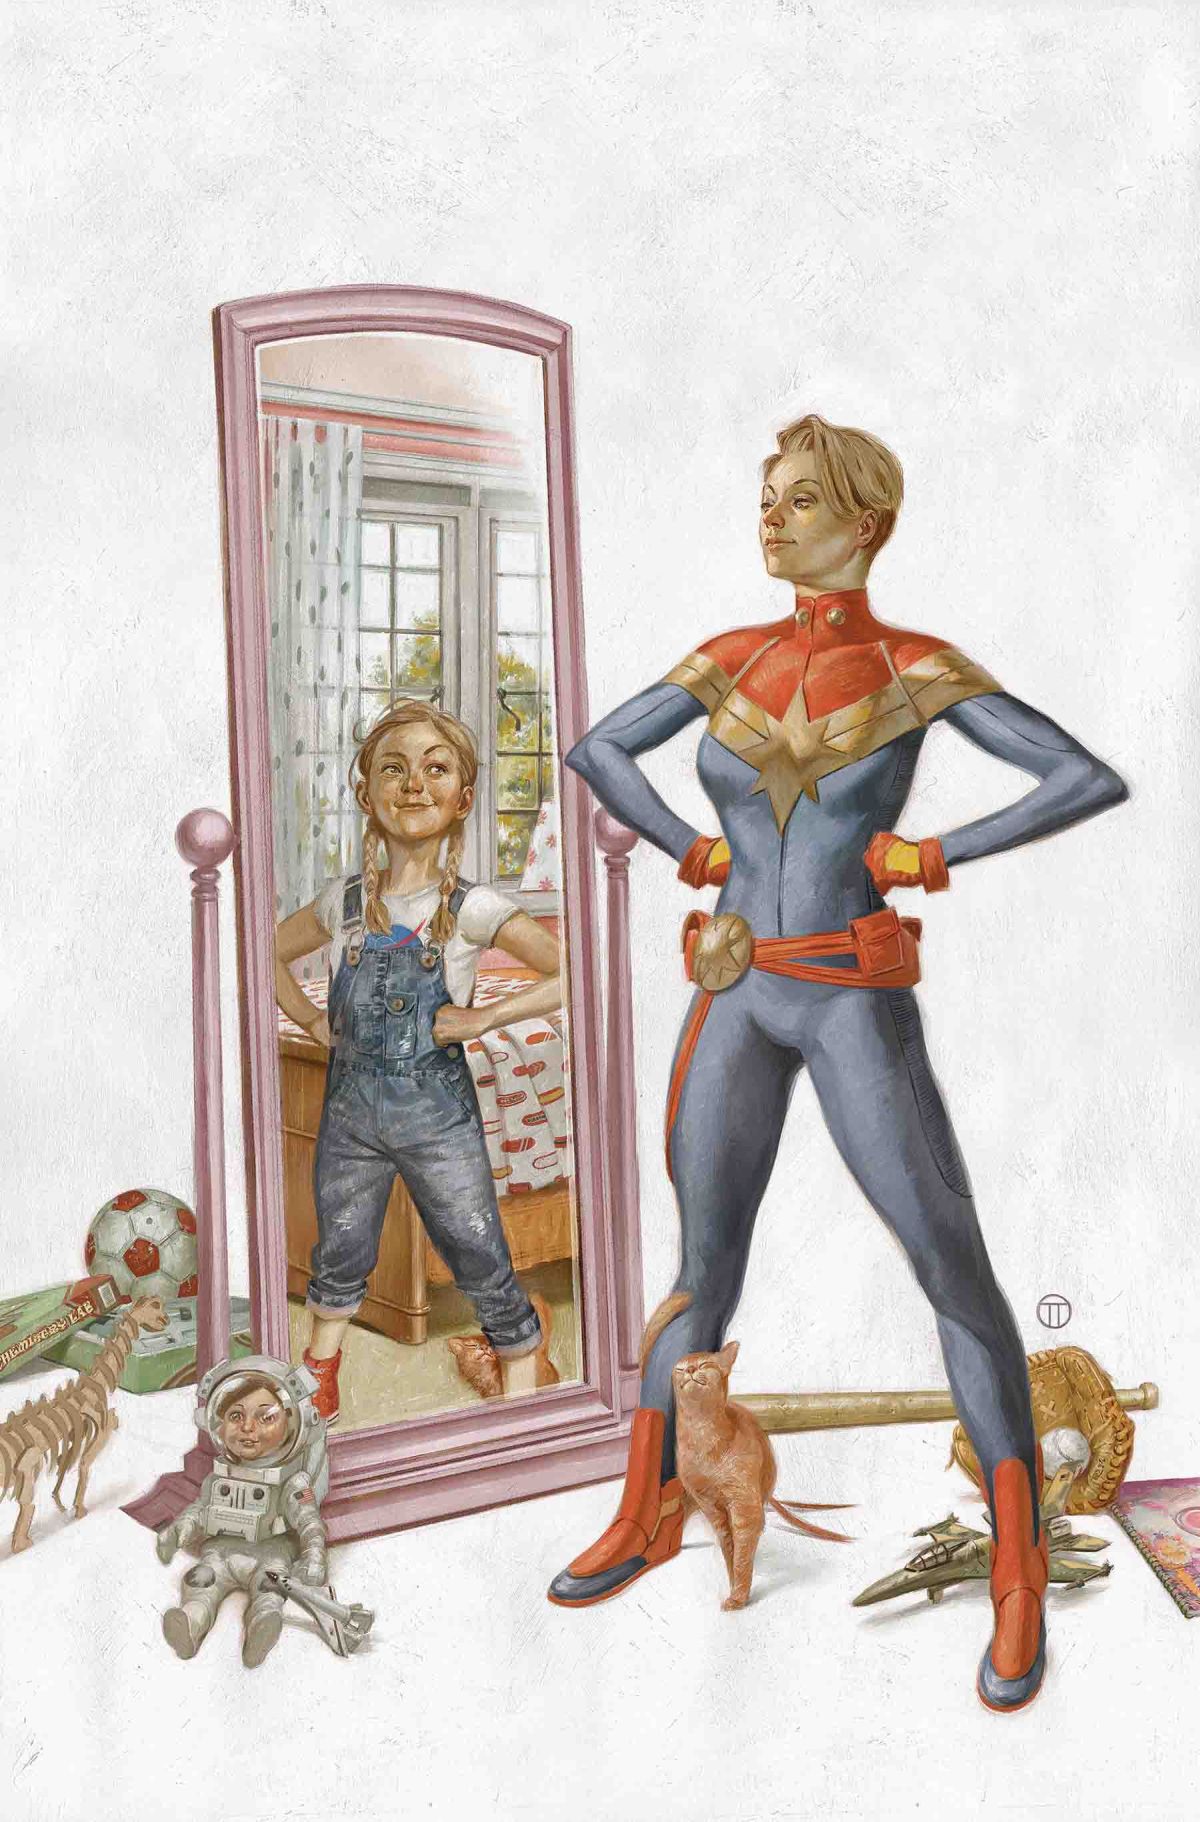 THE LIFE OF CAPTAIN MARVEL #2 (of 5)